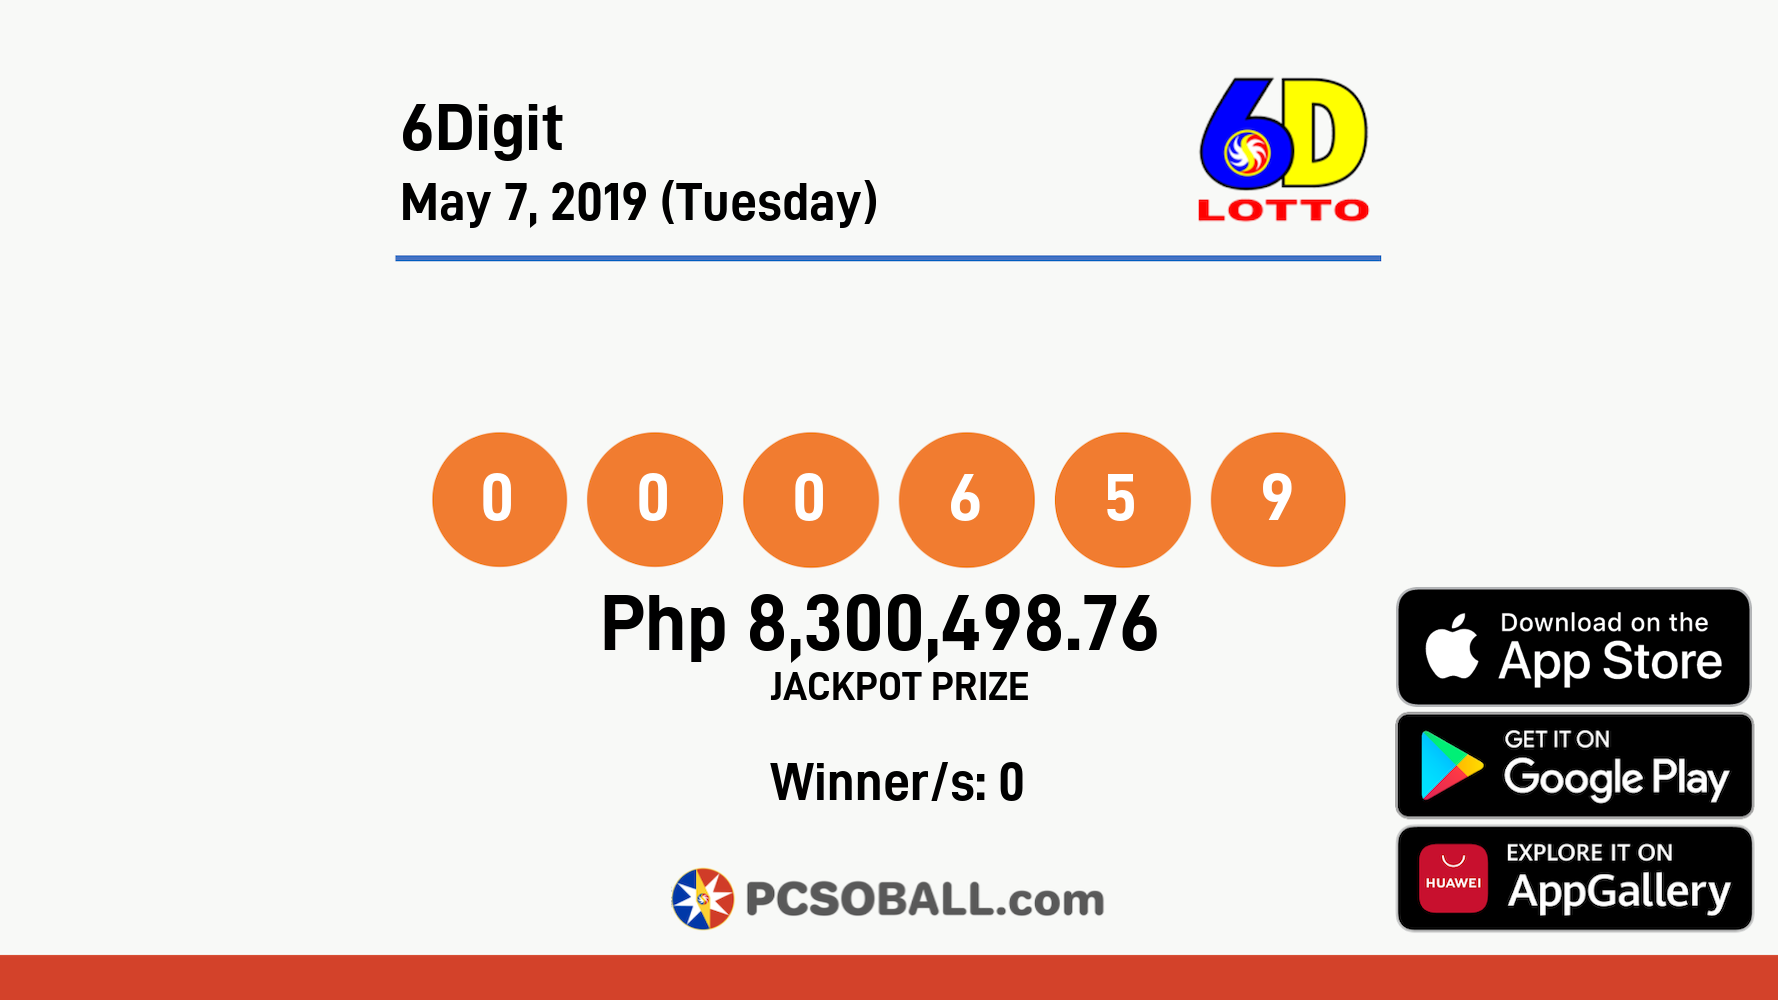 6Digit May 7, 2019 (Tuesday) Result